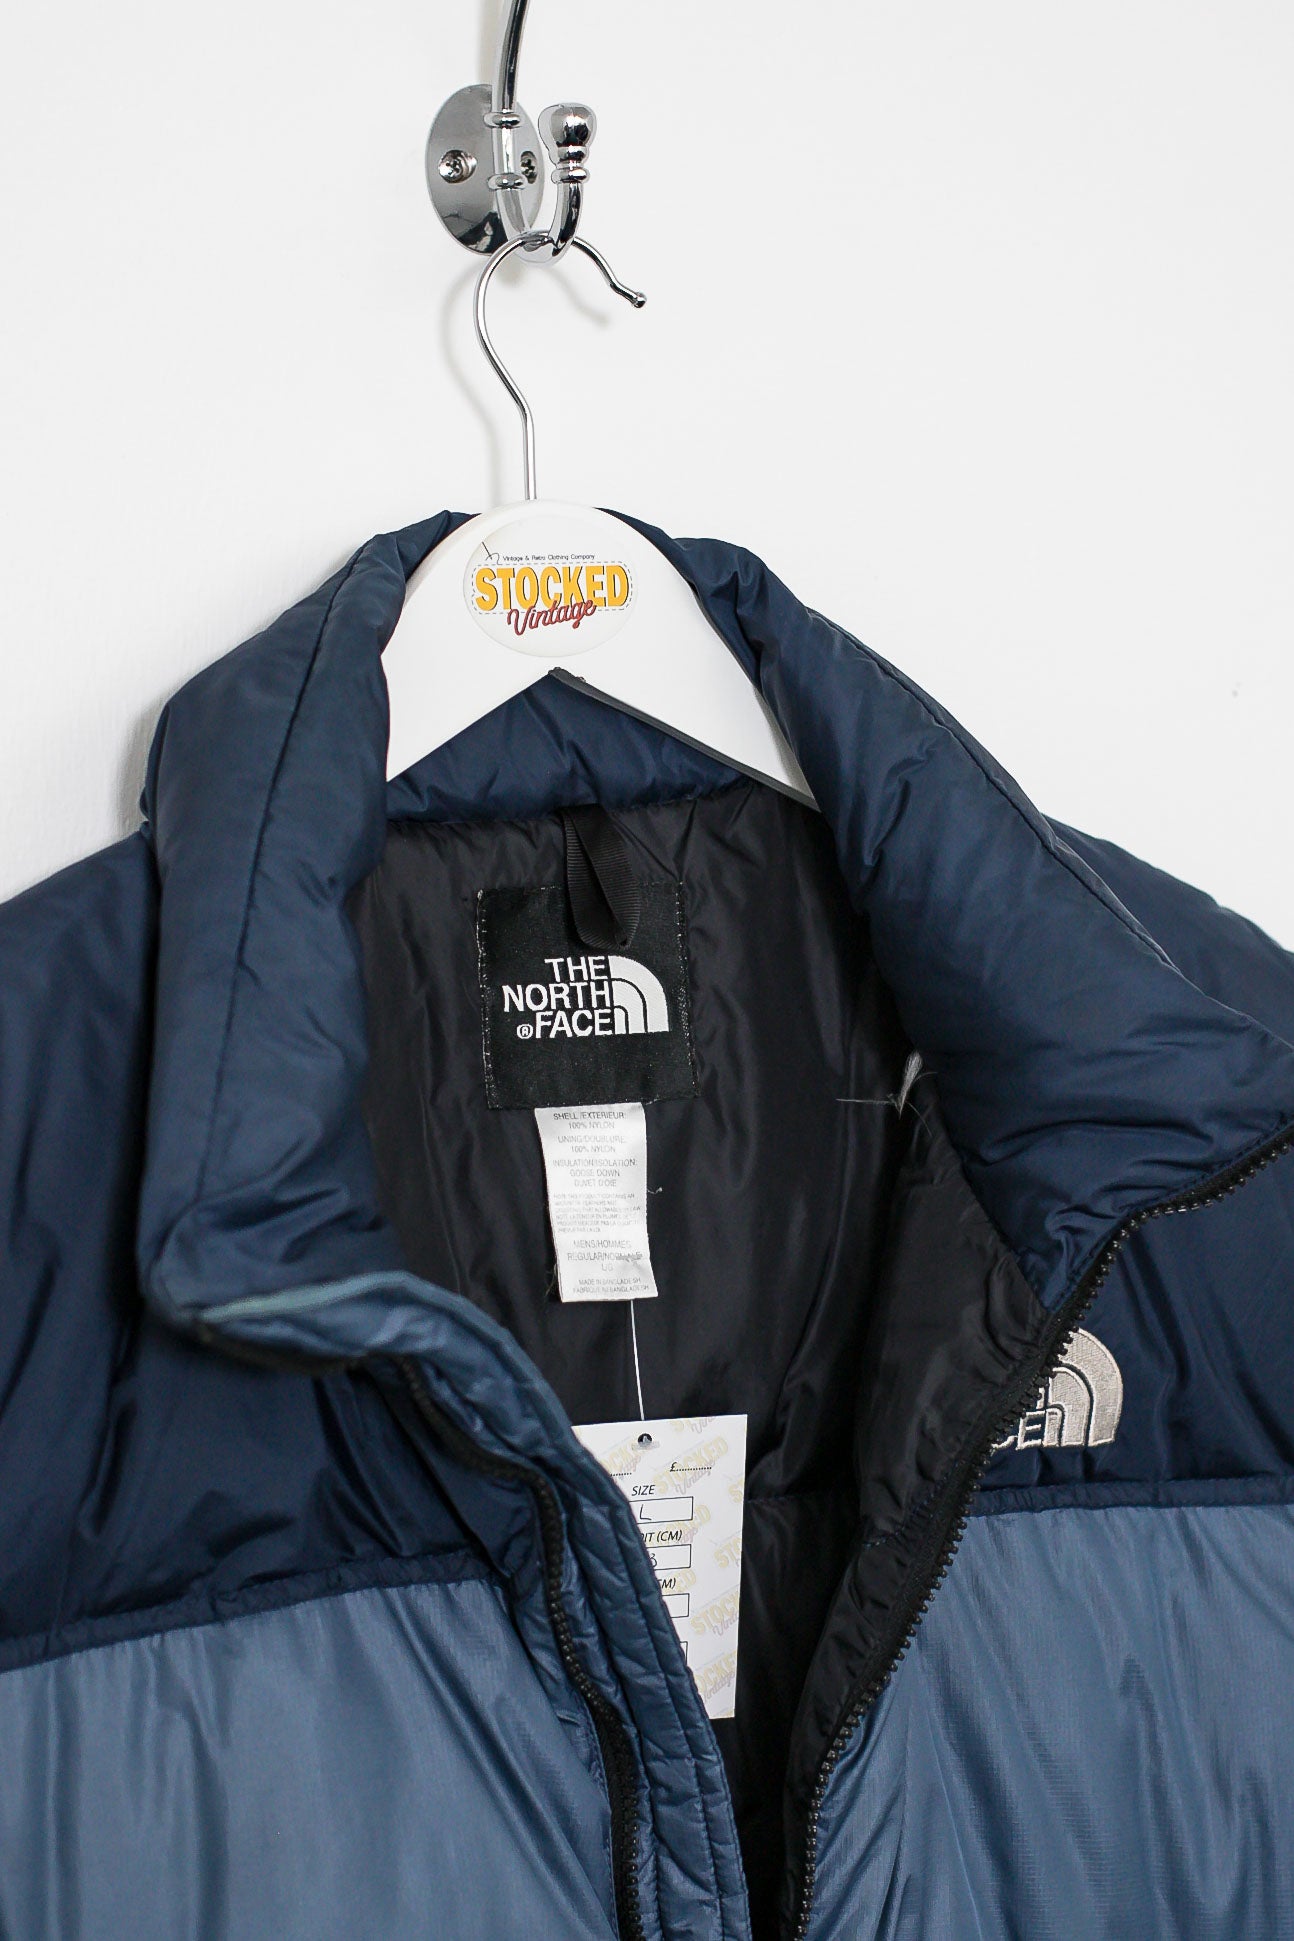 The North Face 700 Fill Gilet Puffer Jacket (L) – Stocked Vintage